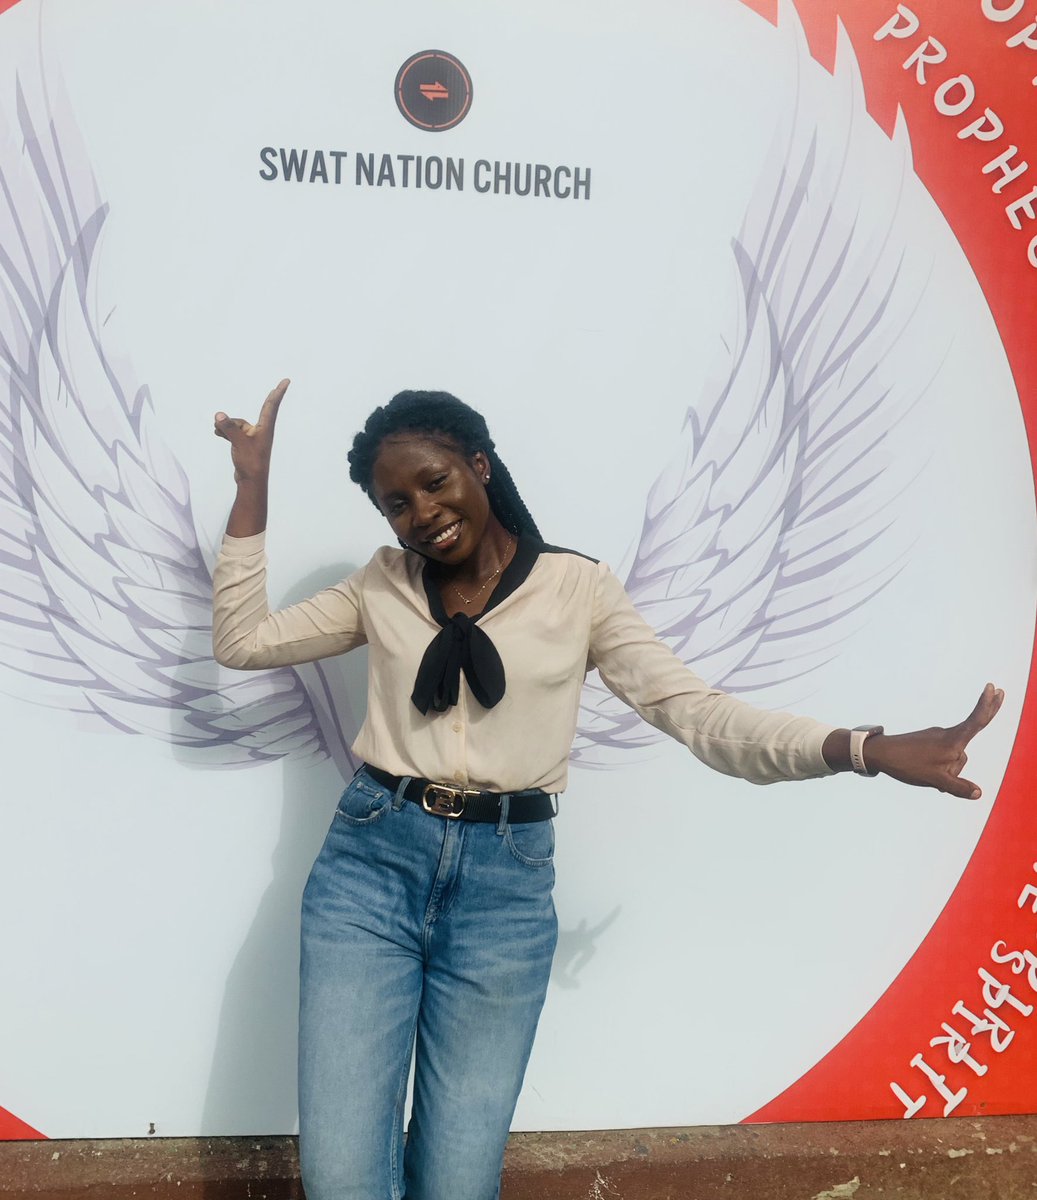 Meetings are God-ordained, and today’s SWM was just that for me! 
In short! GOD’S WORD WORK!
Congratulations to me!🤸‍♀️💃🏾
#swm #swatnationschurch #believersgathering